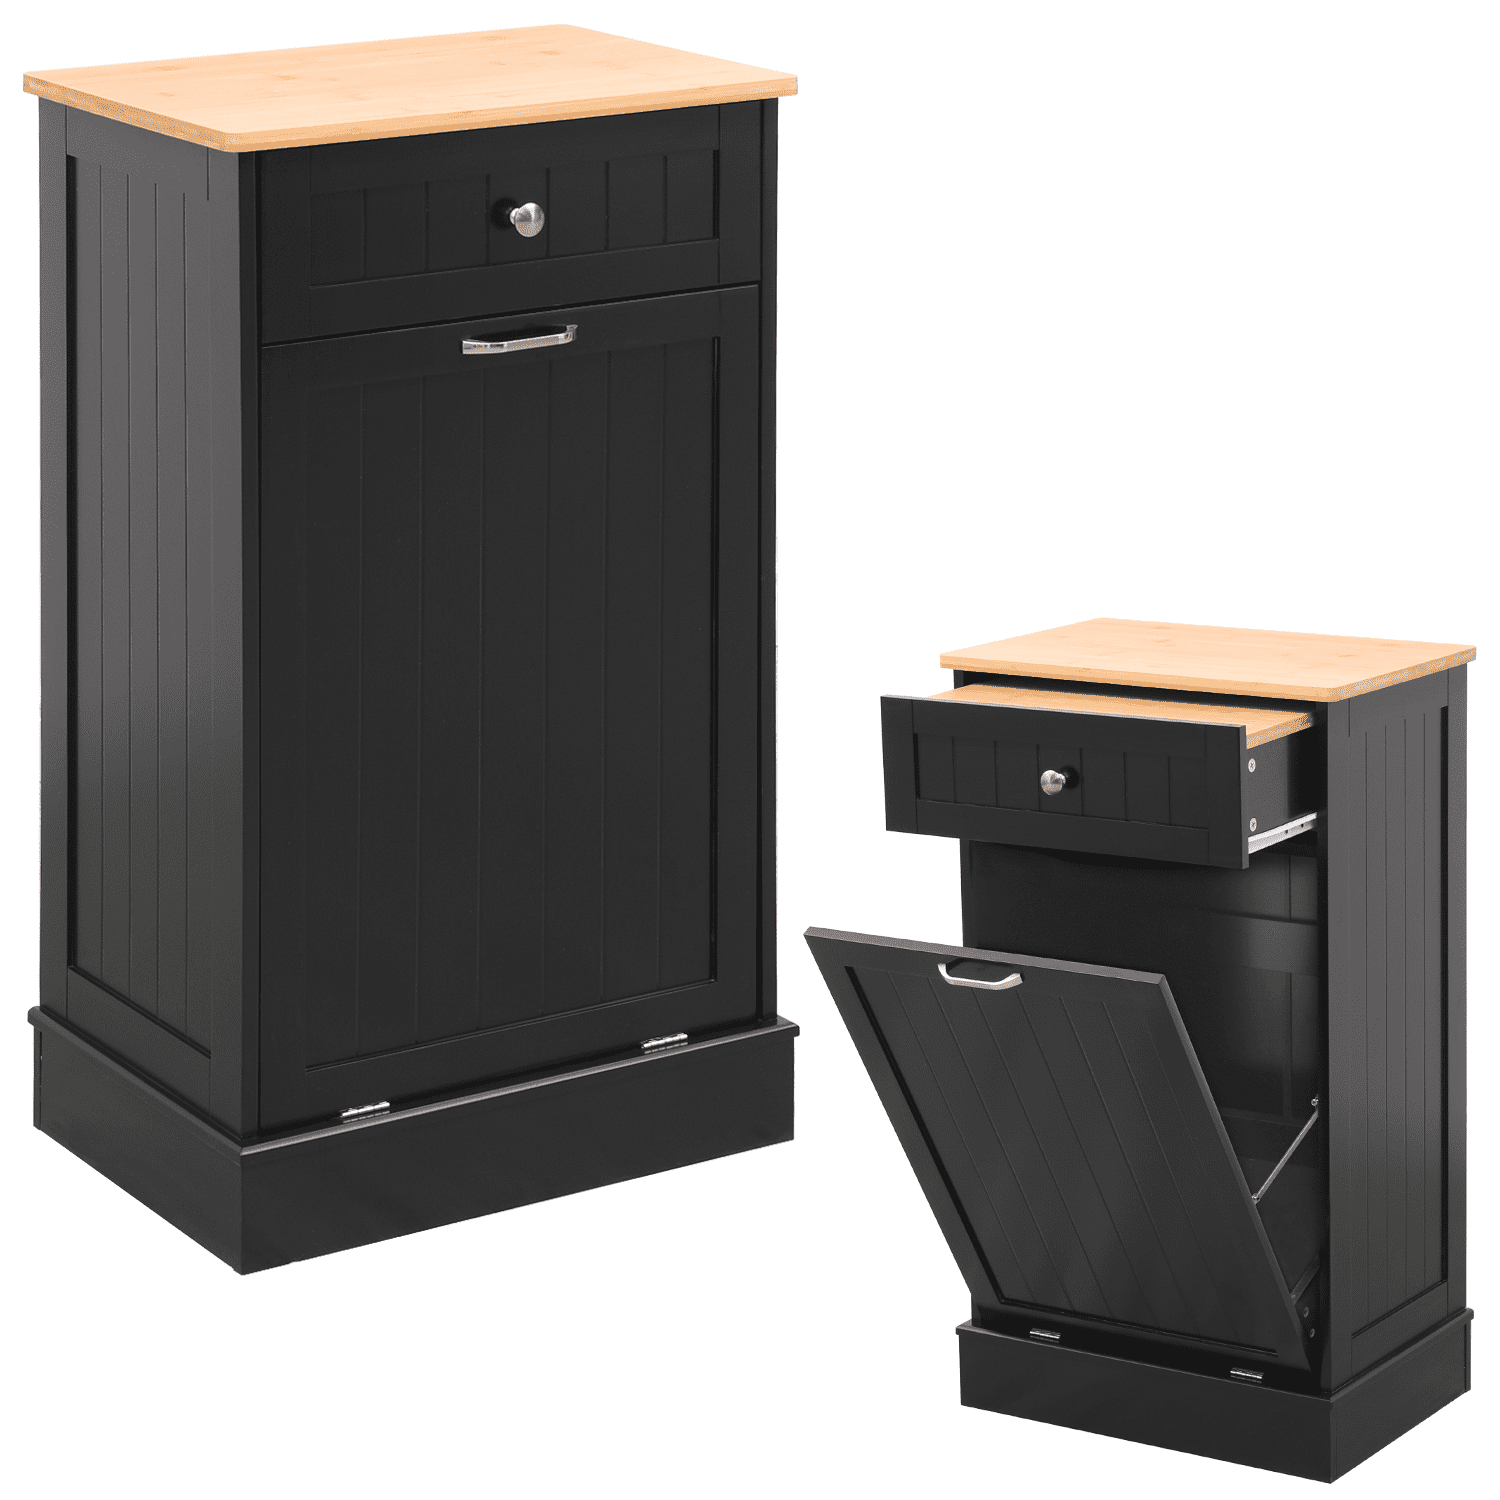 Under Sink Trash Pullout — Markay Cabinets